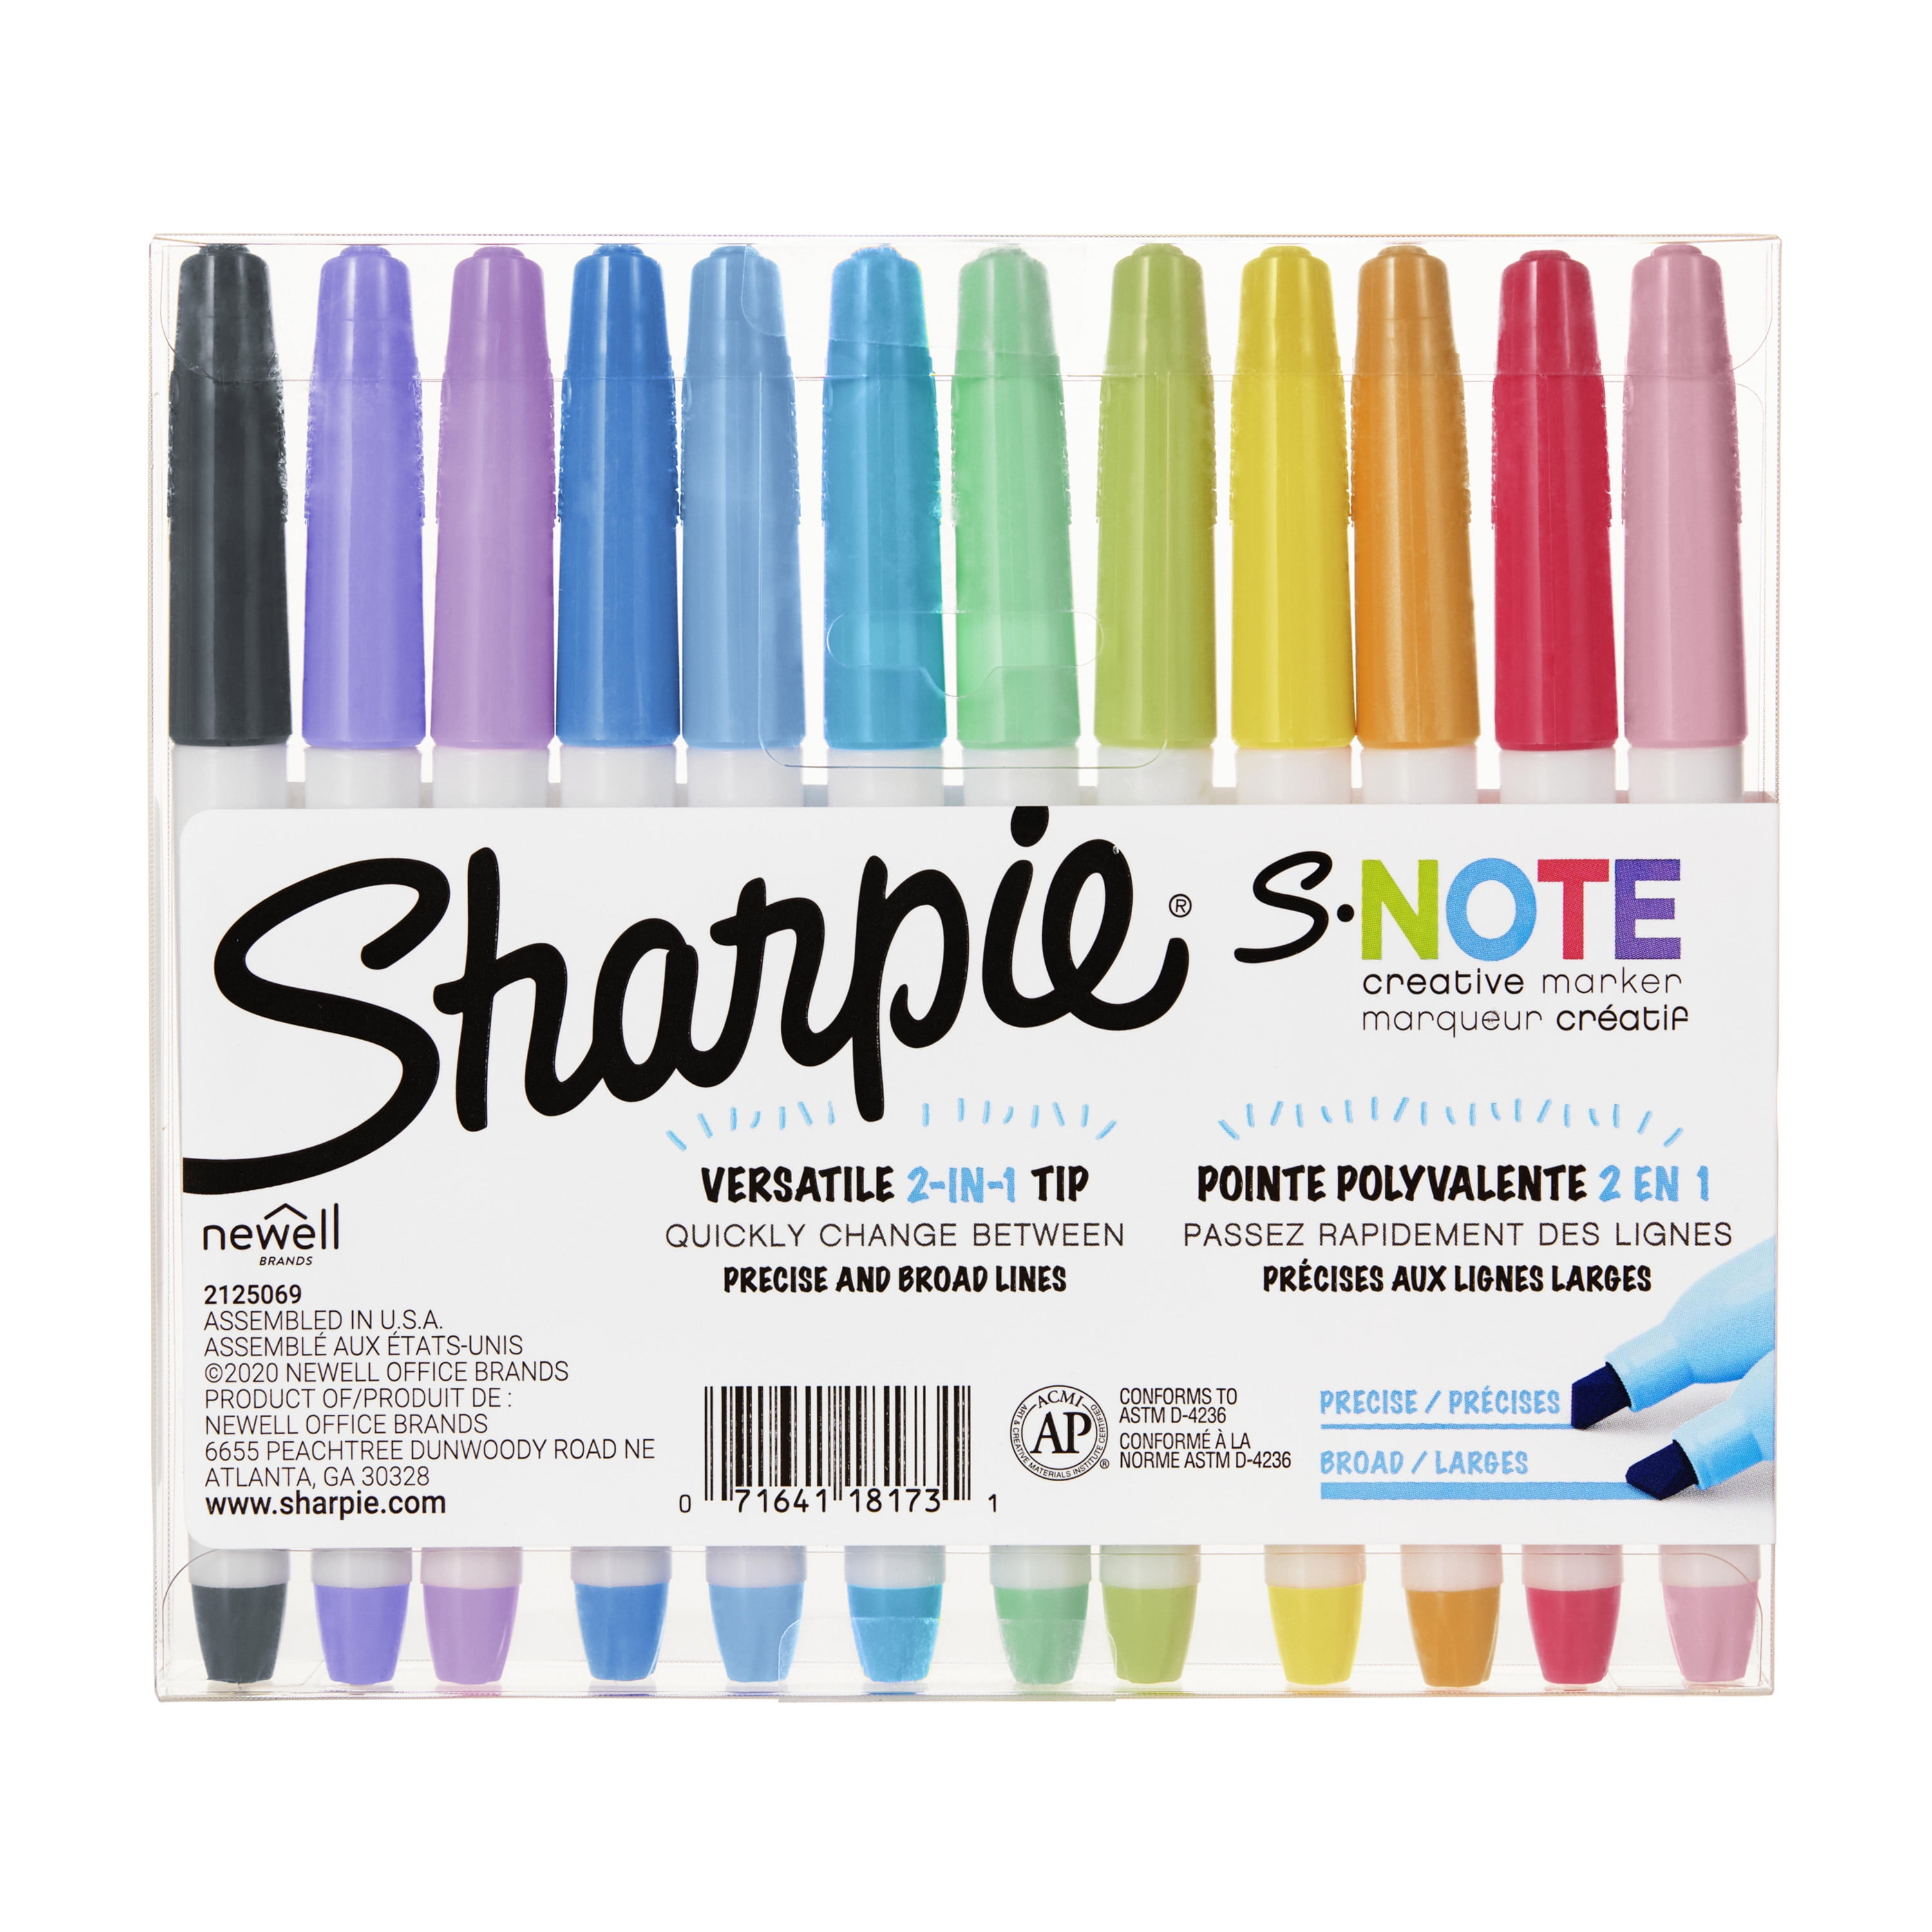 Sharpie S-Note Creative Marker Set, 12-Markers, Highlighter, Assorted Colors